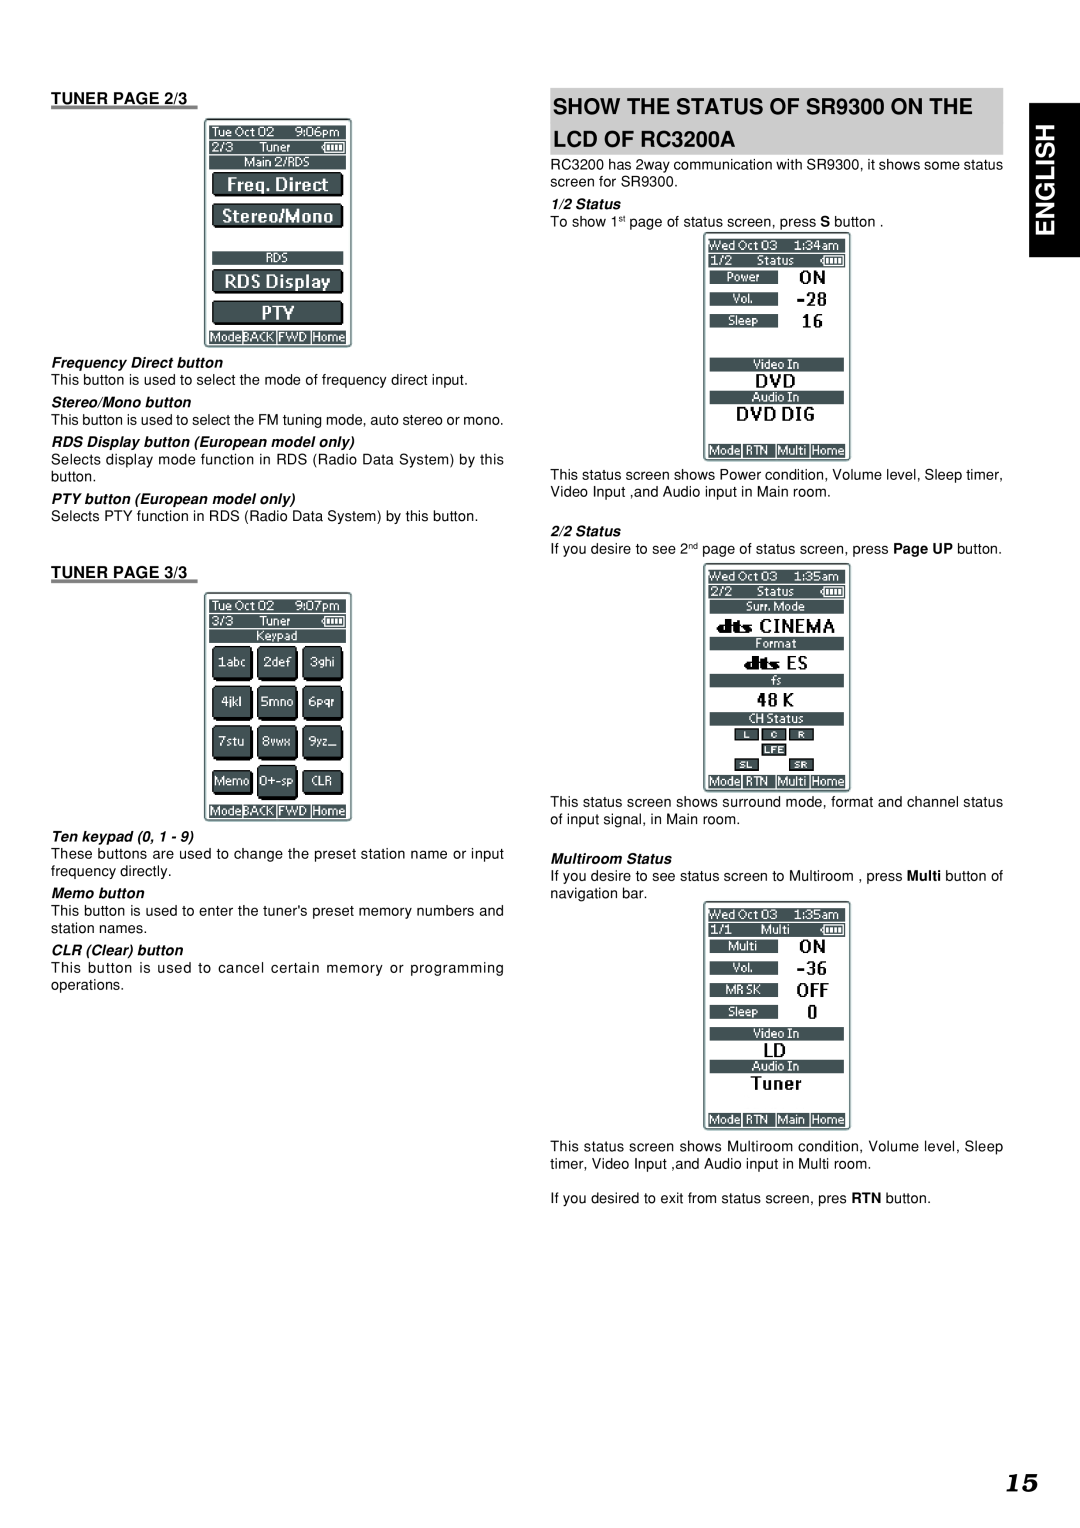 Marantz SR9300 manual English, TUNER PAGE 2/3, TUNER PAGE 3/3, Frequency Direct button, Stereo/Mono button, Ten keypad 0, 1 